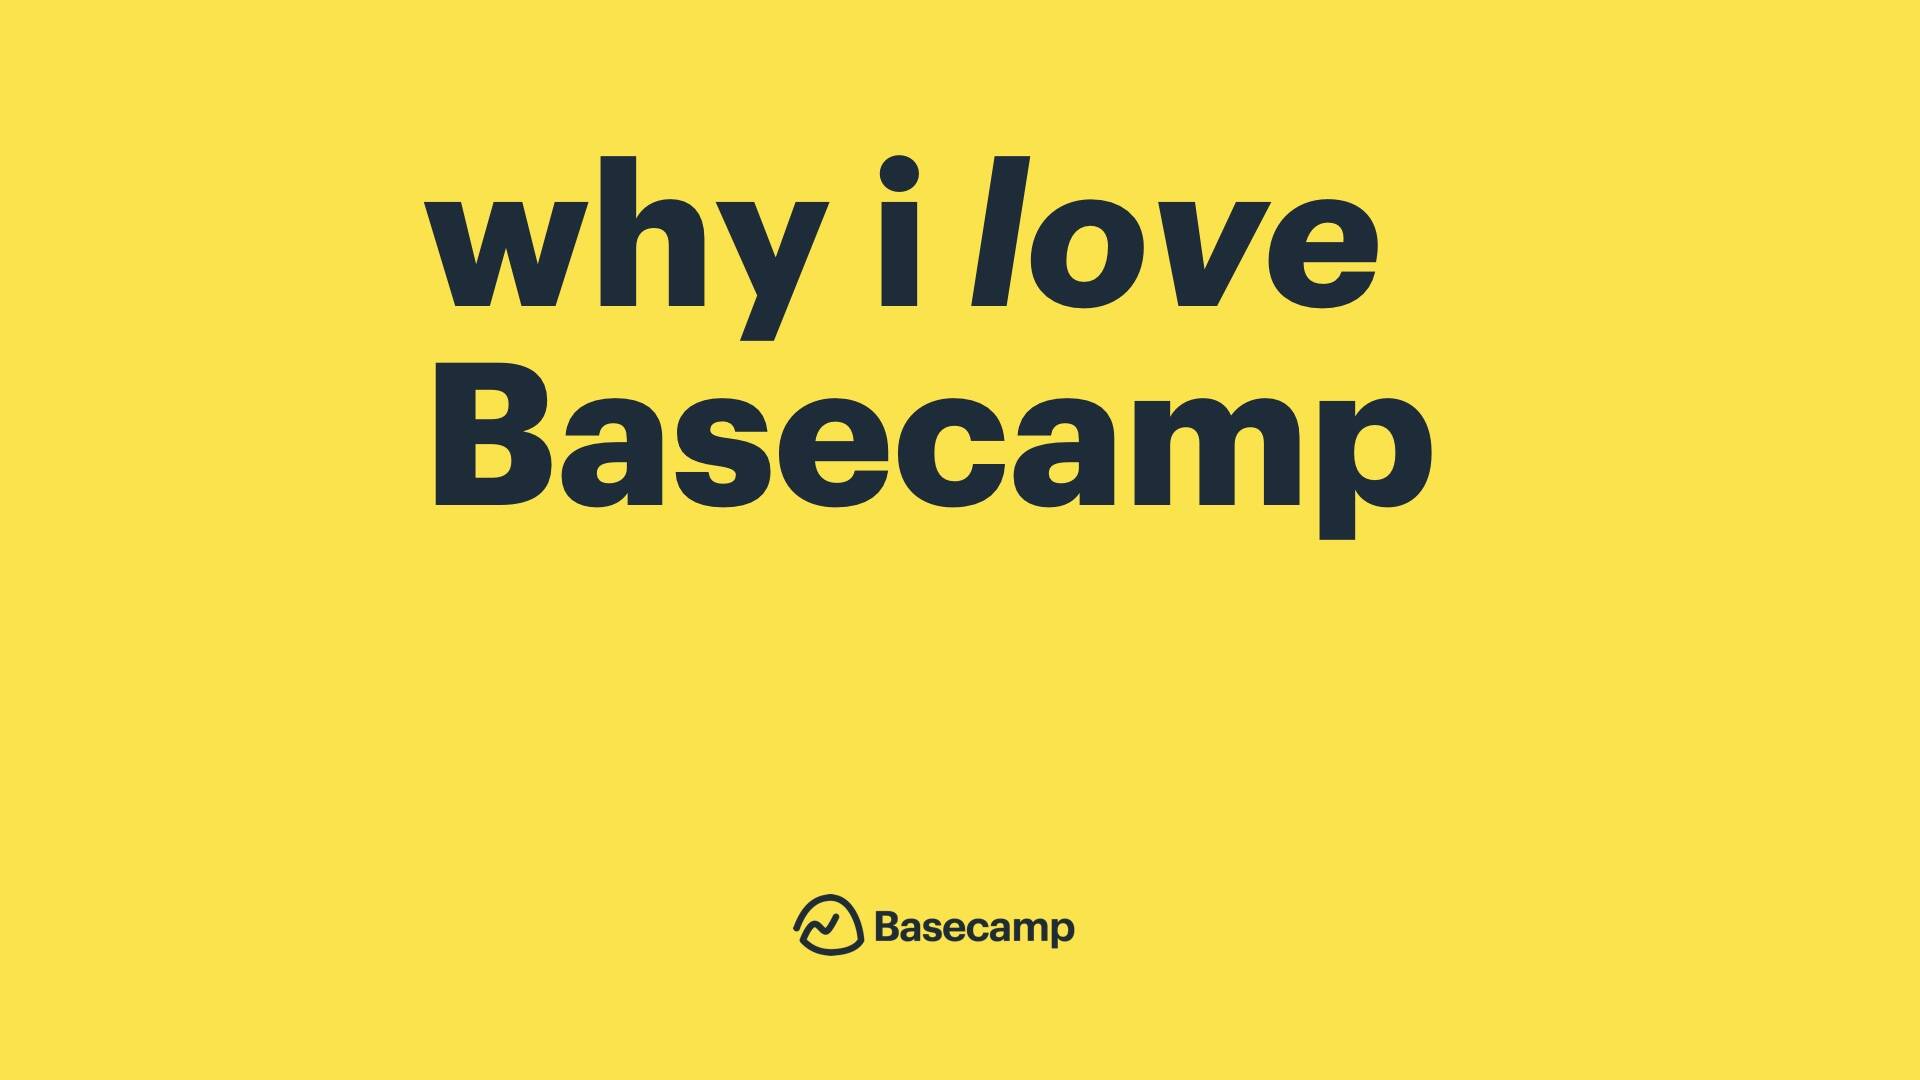 202301010135 Ad 46 EN- Basecamp gives me peace of mind when managing client projects and my life.jpg